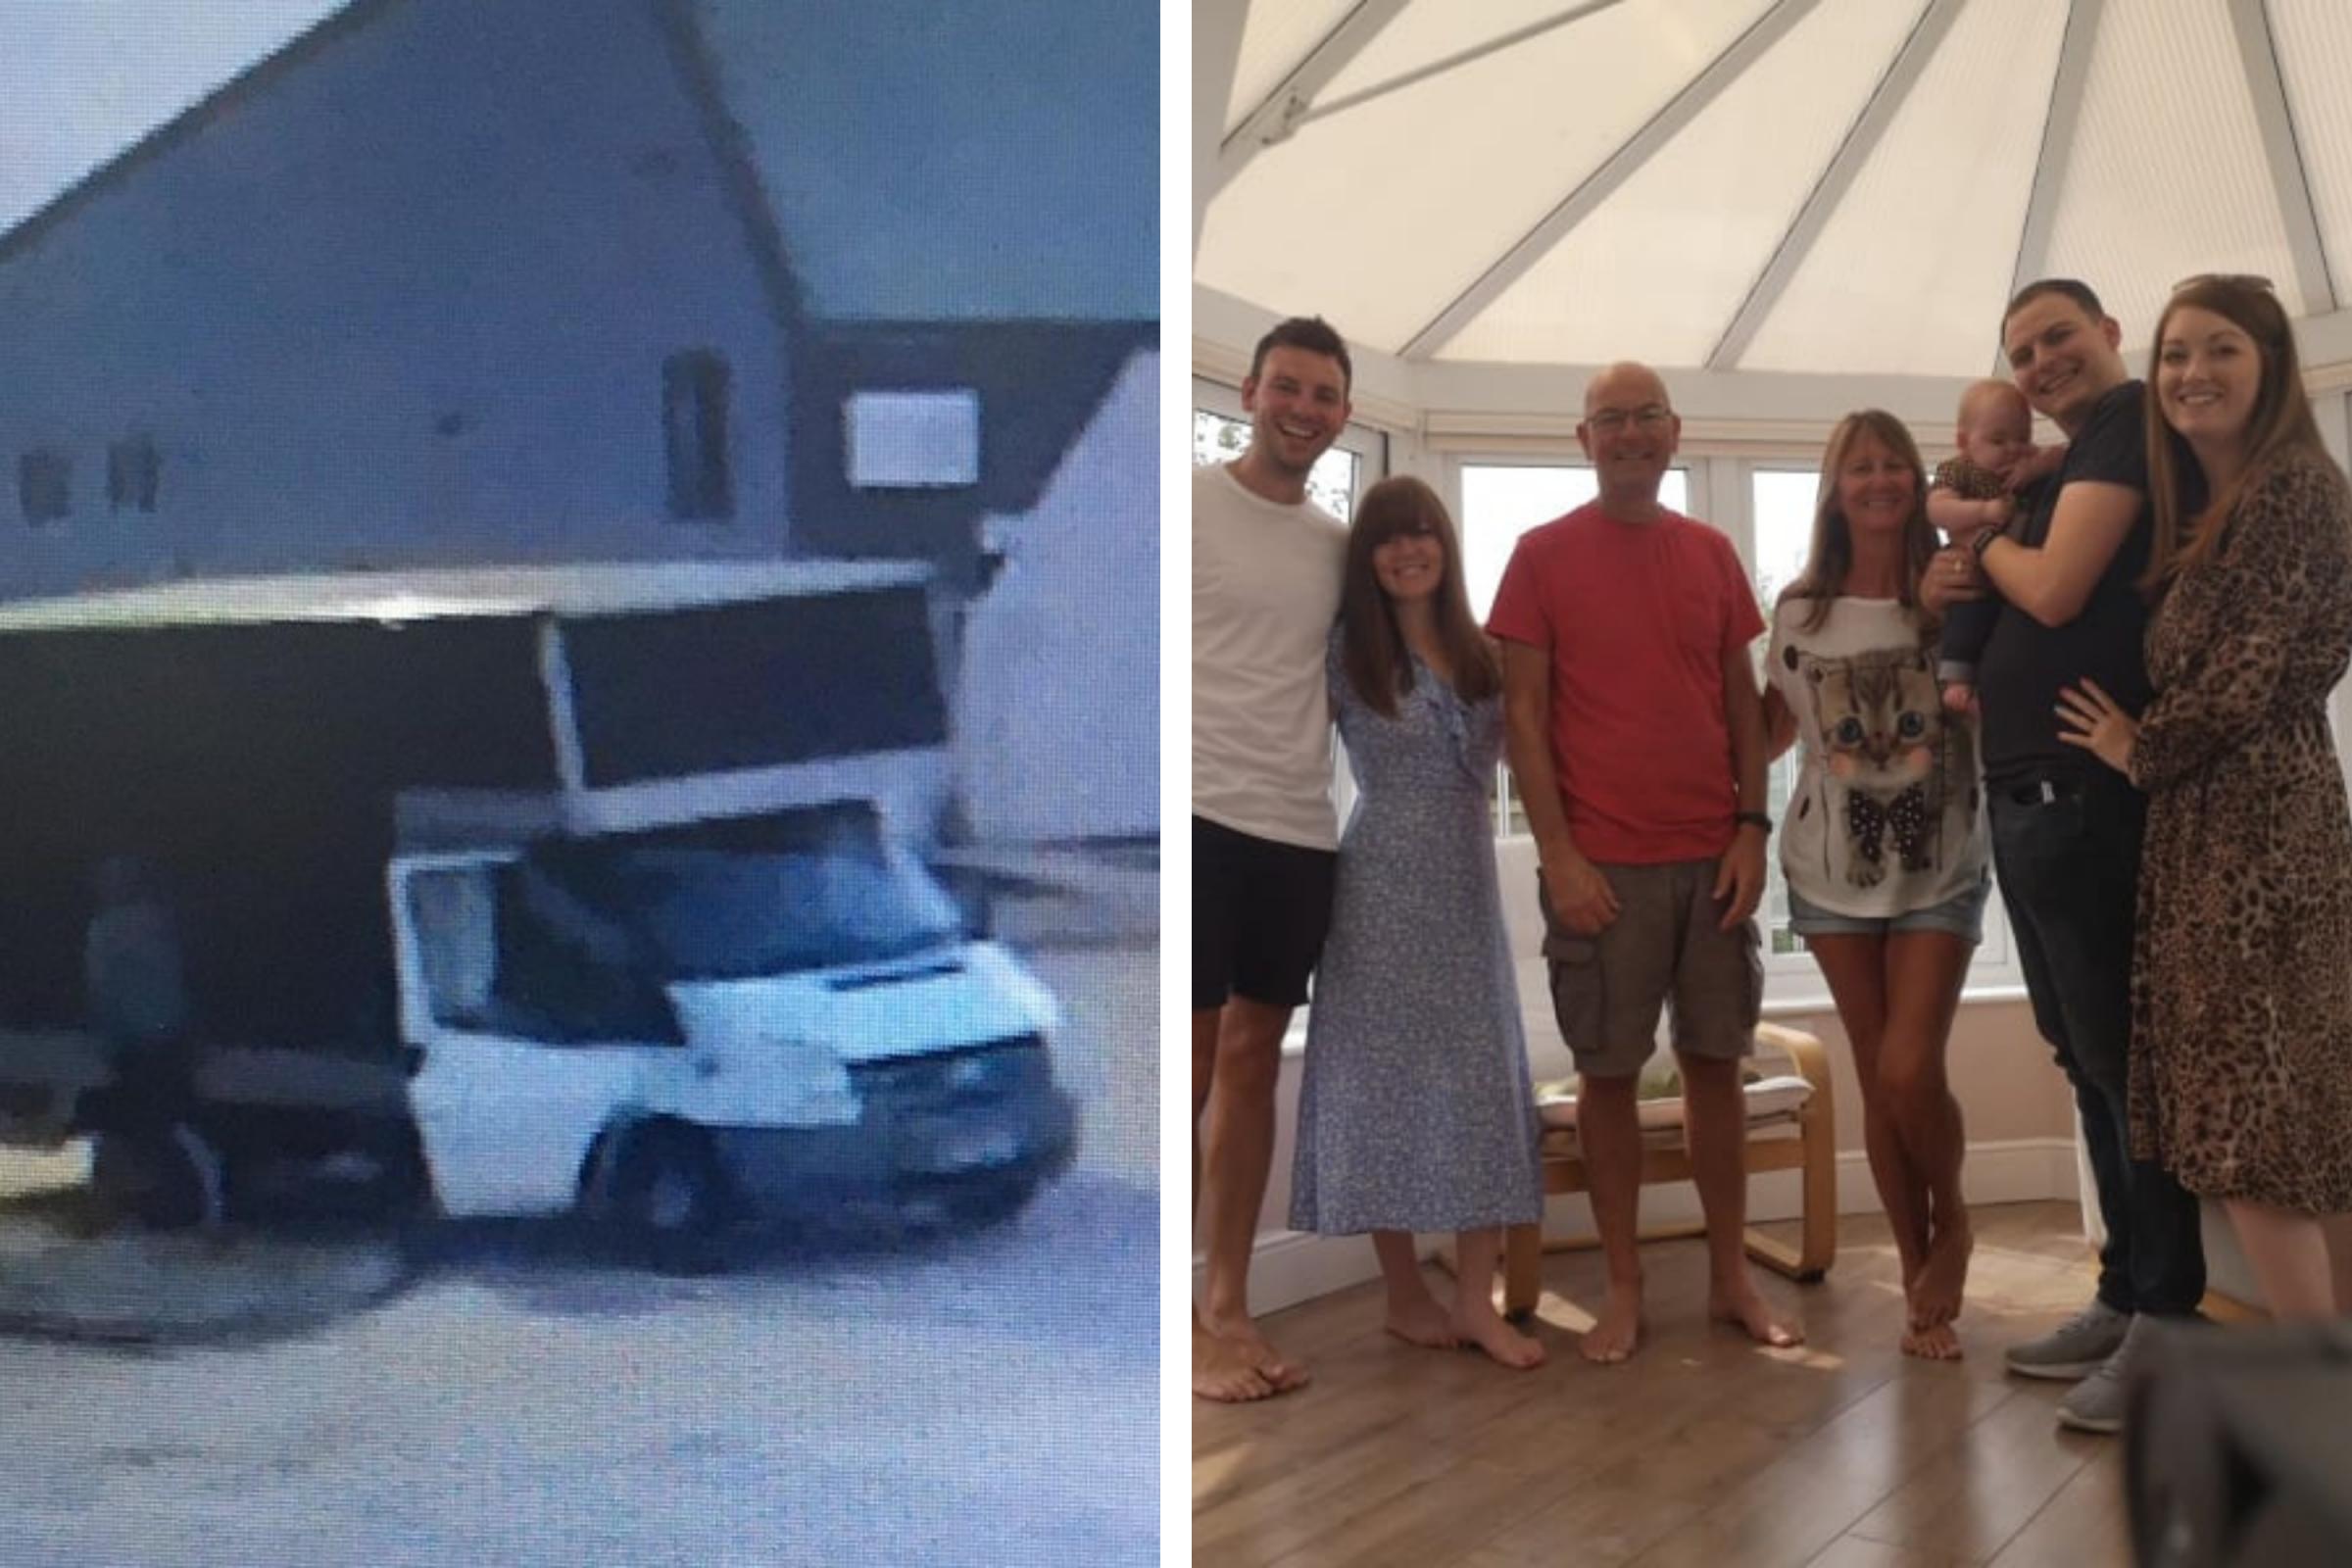 Clacton couple's possessions stolen in removal van theft ahead of move